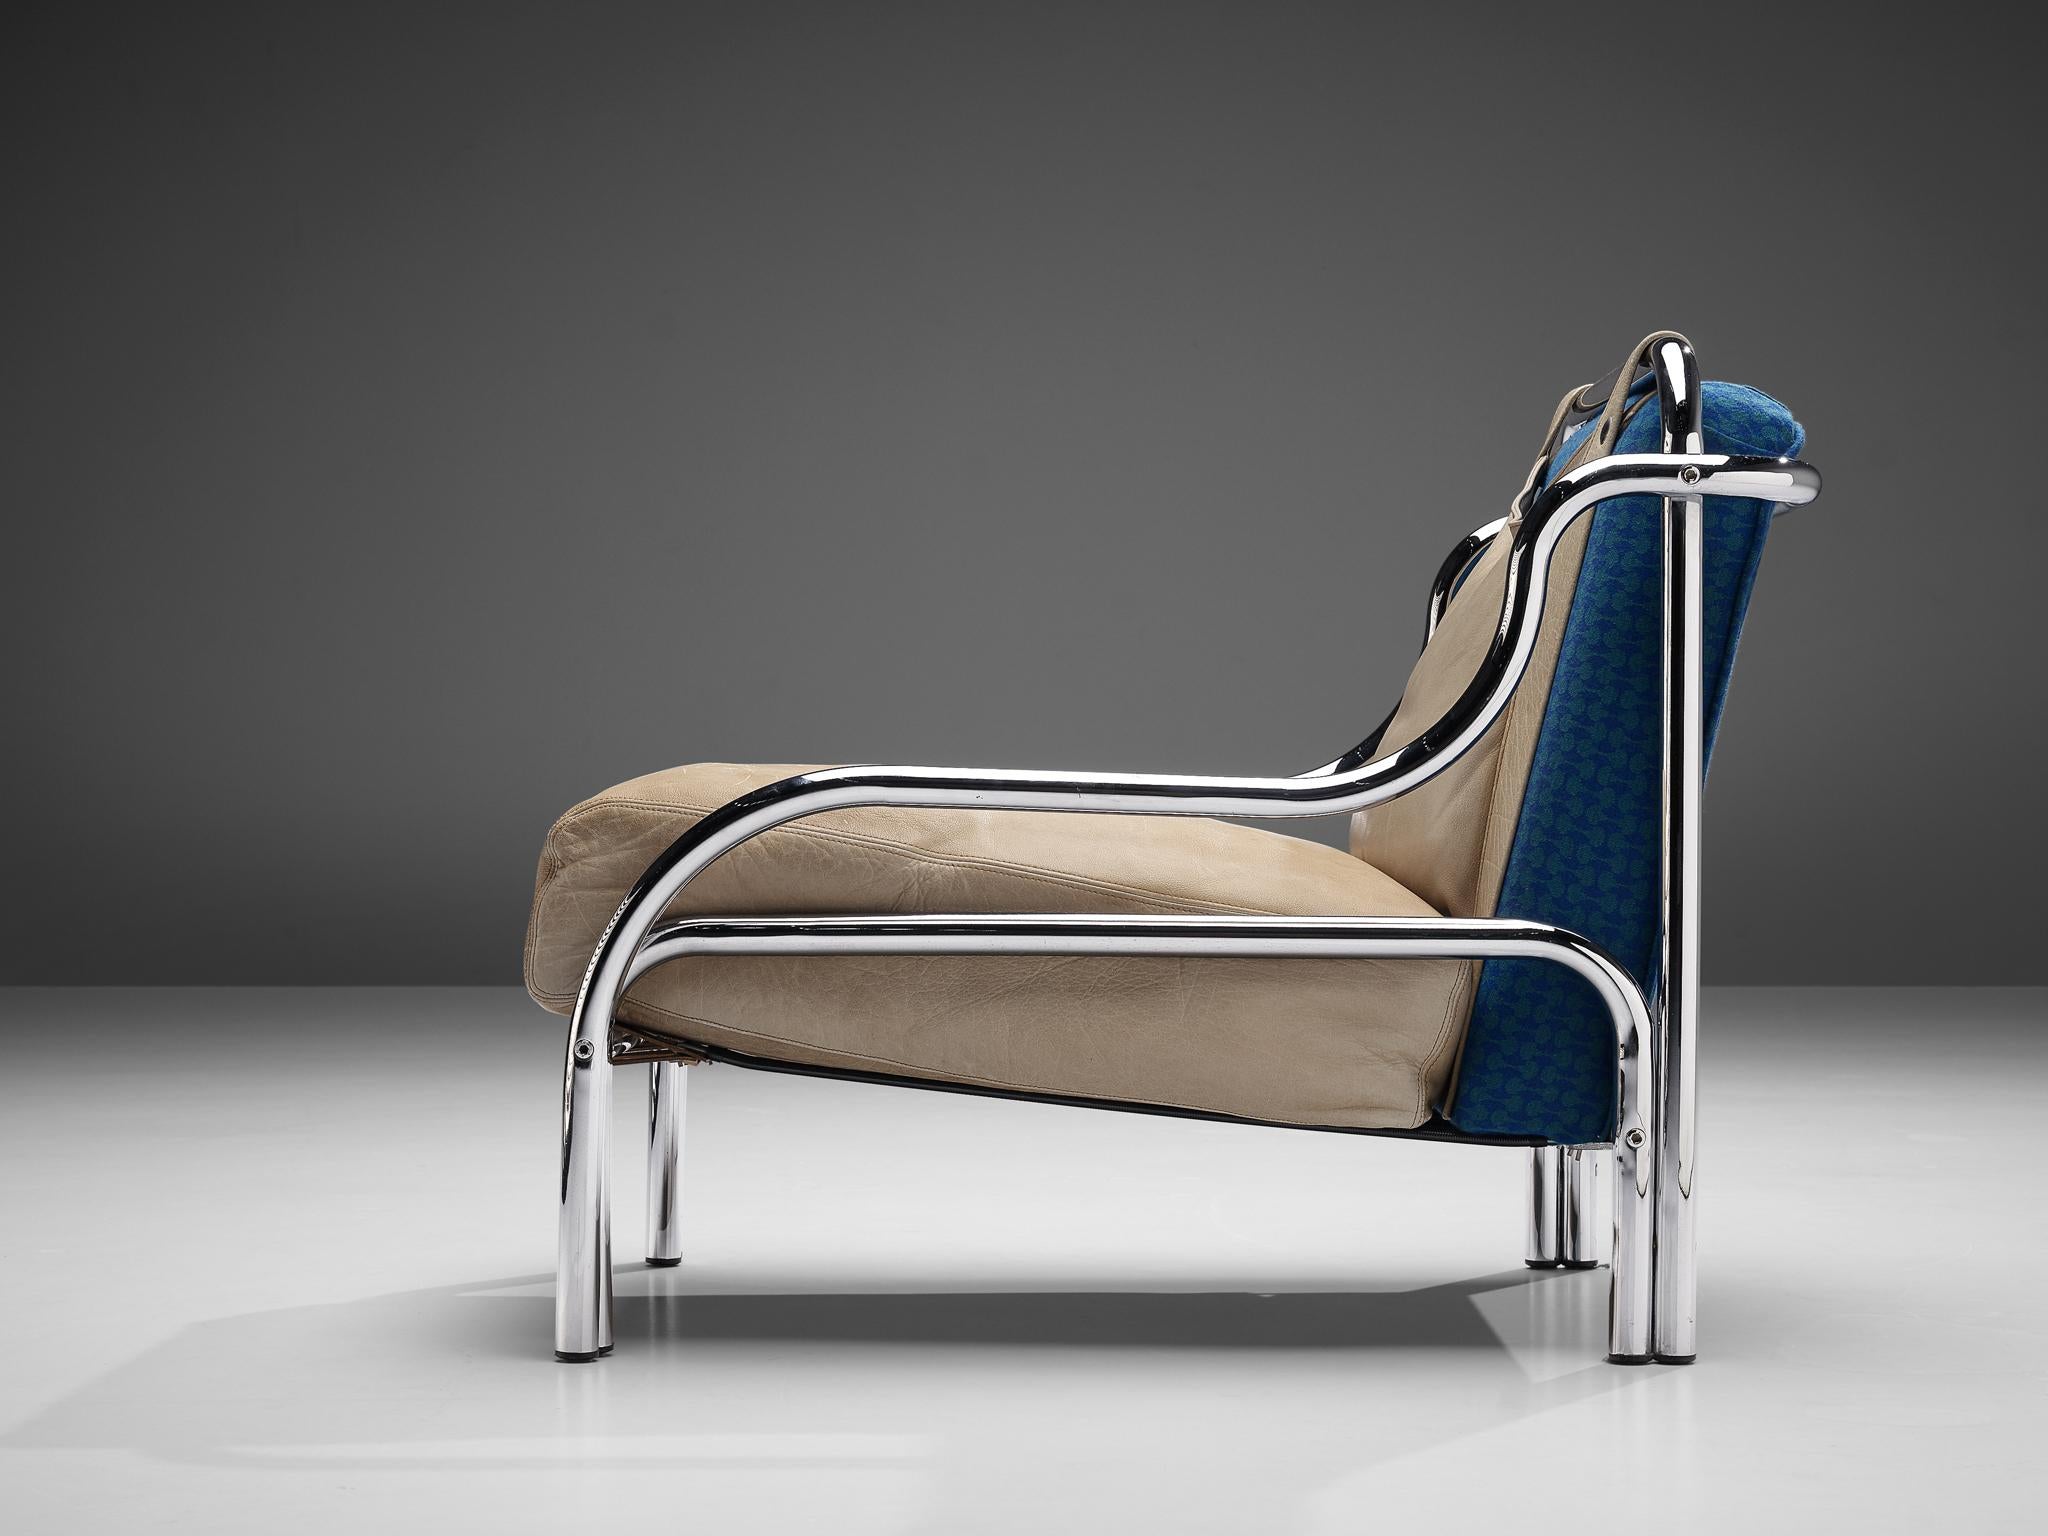 Gae Aulenti for Poltranova, lounge chair model 'Stringa', leather, chromed metal, blue fabric upholstery, Italy, 1962

'Stringa' lounge chair designed by Gae Aulenti for Poltranova in 1962. A tubular chrome frame with strong proportions and curves